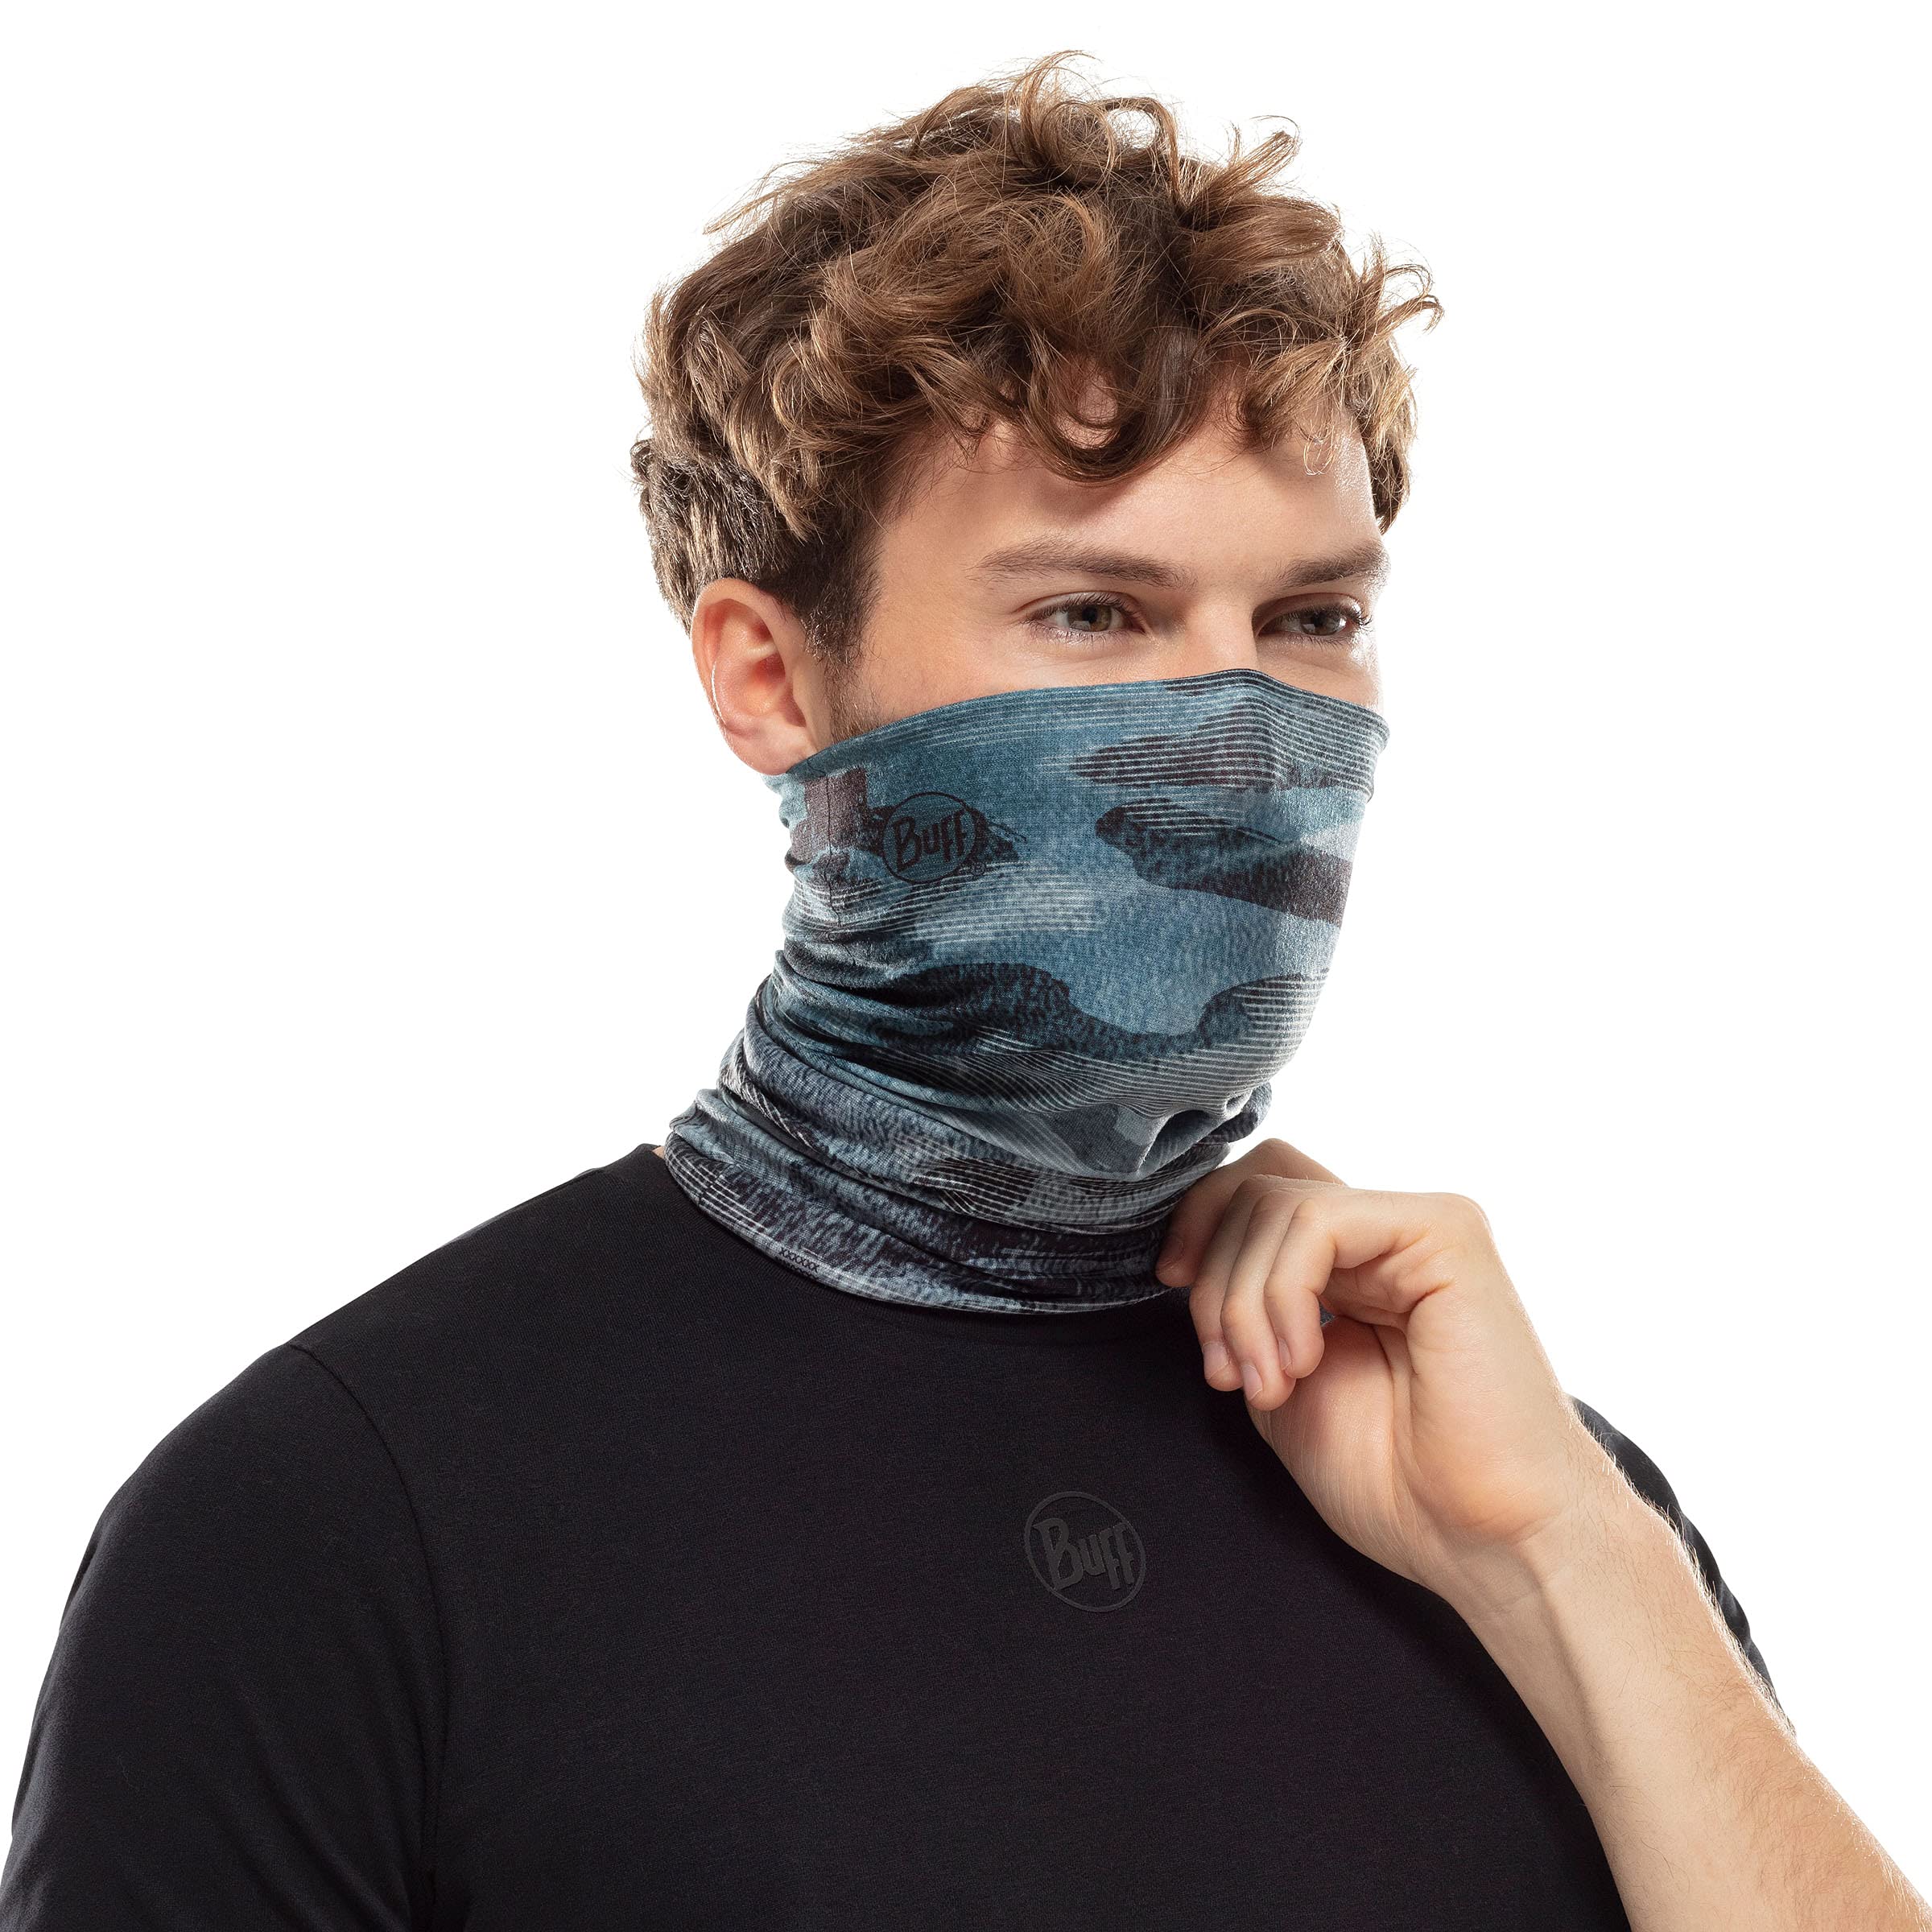 BUFF Adult CoolNet UV+ Multifunctional Headwear and Face Mask, Solid and Patterned Design